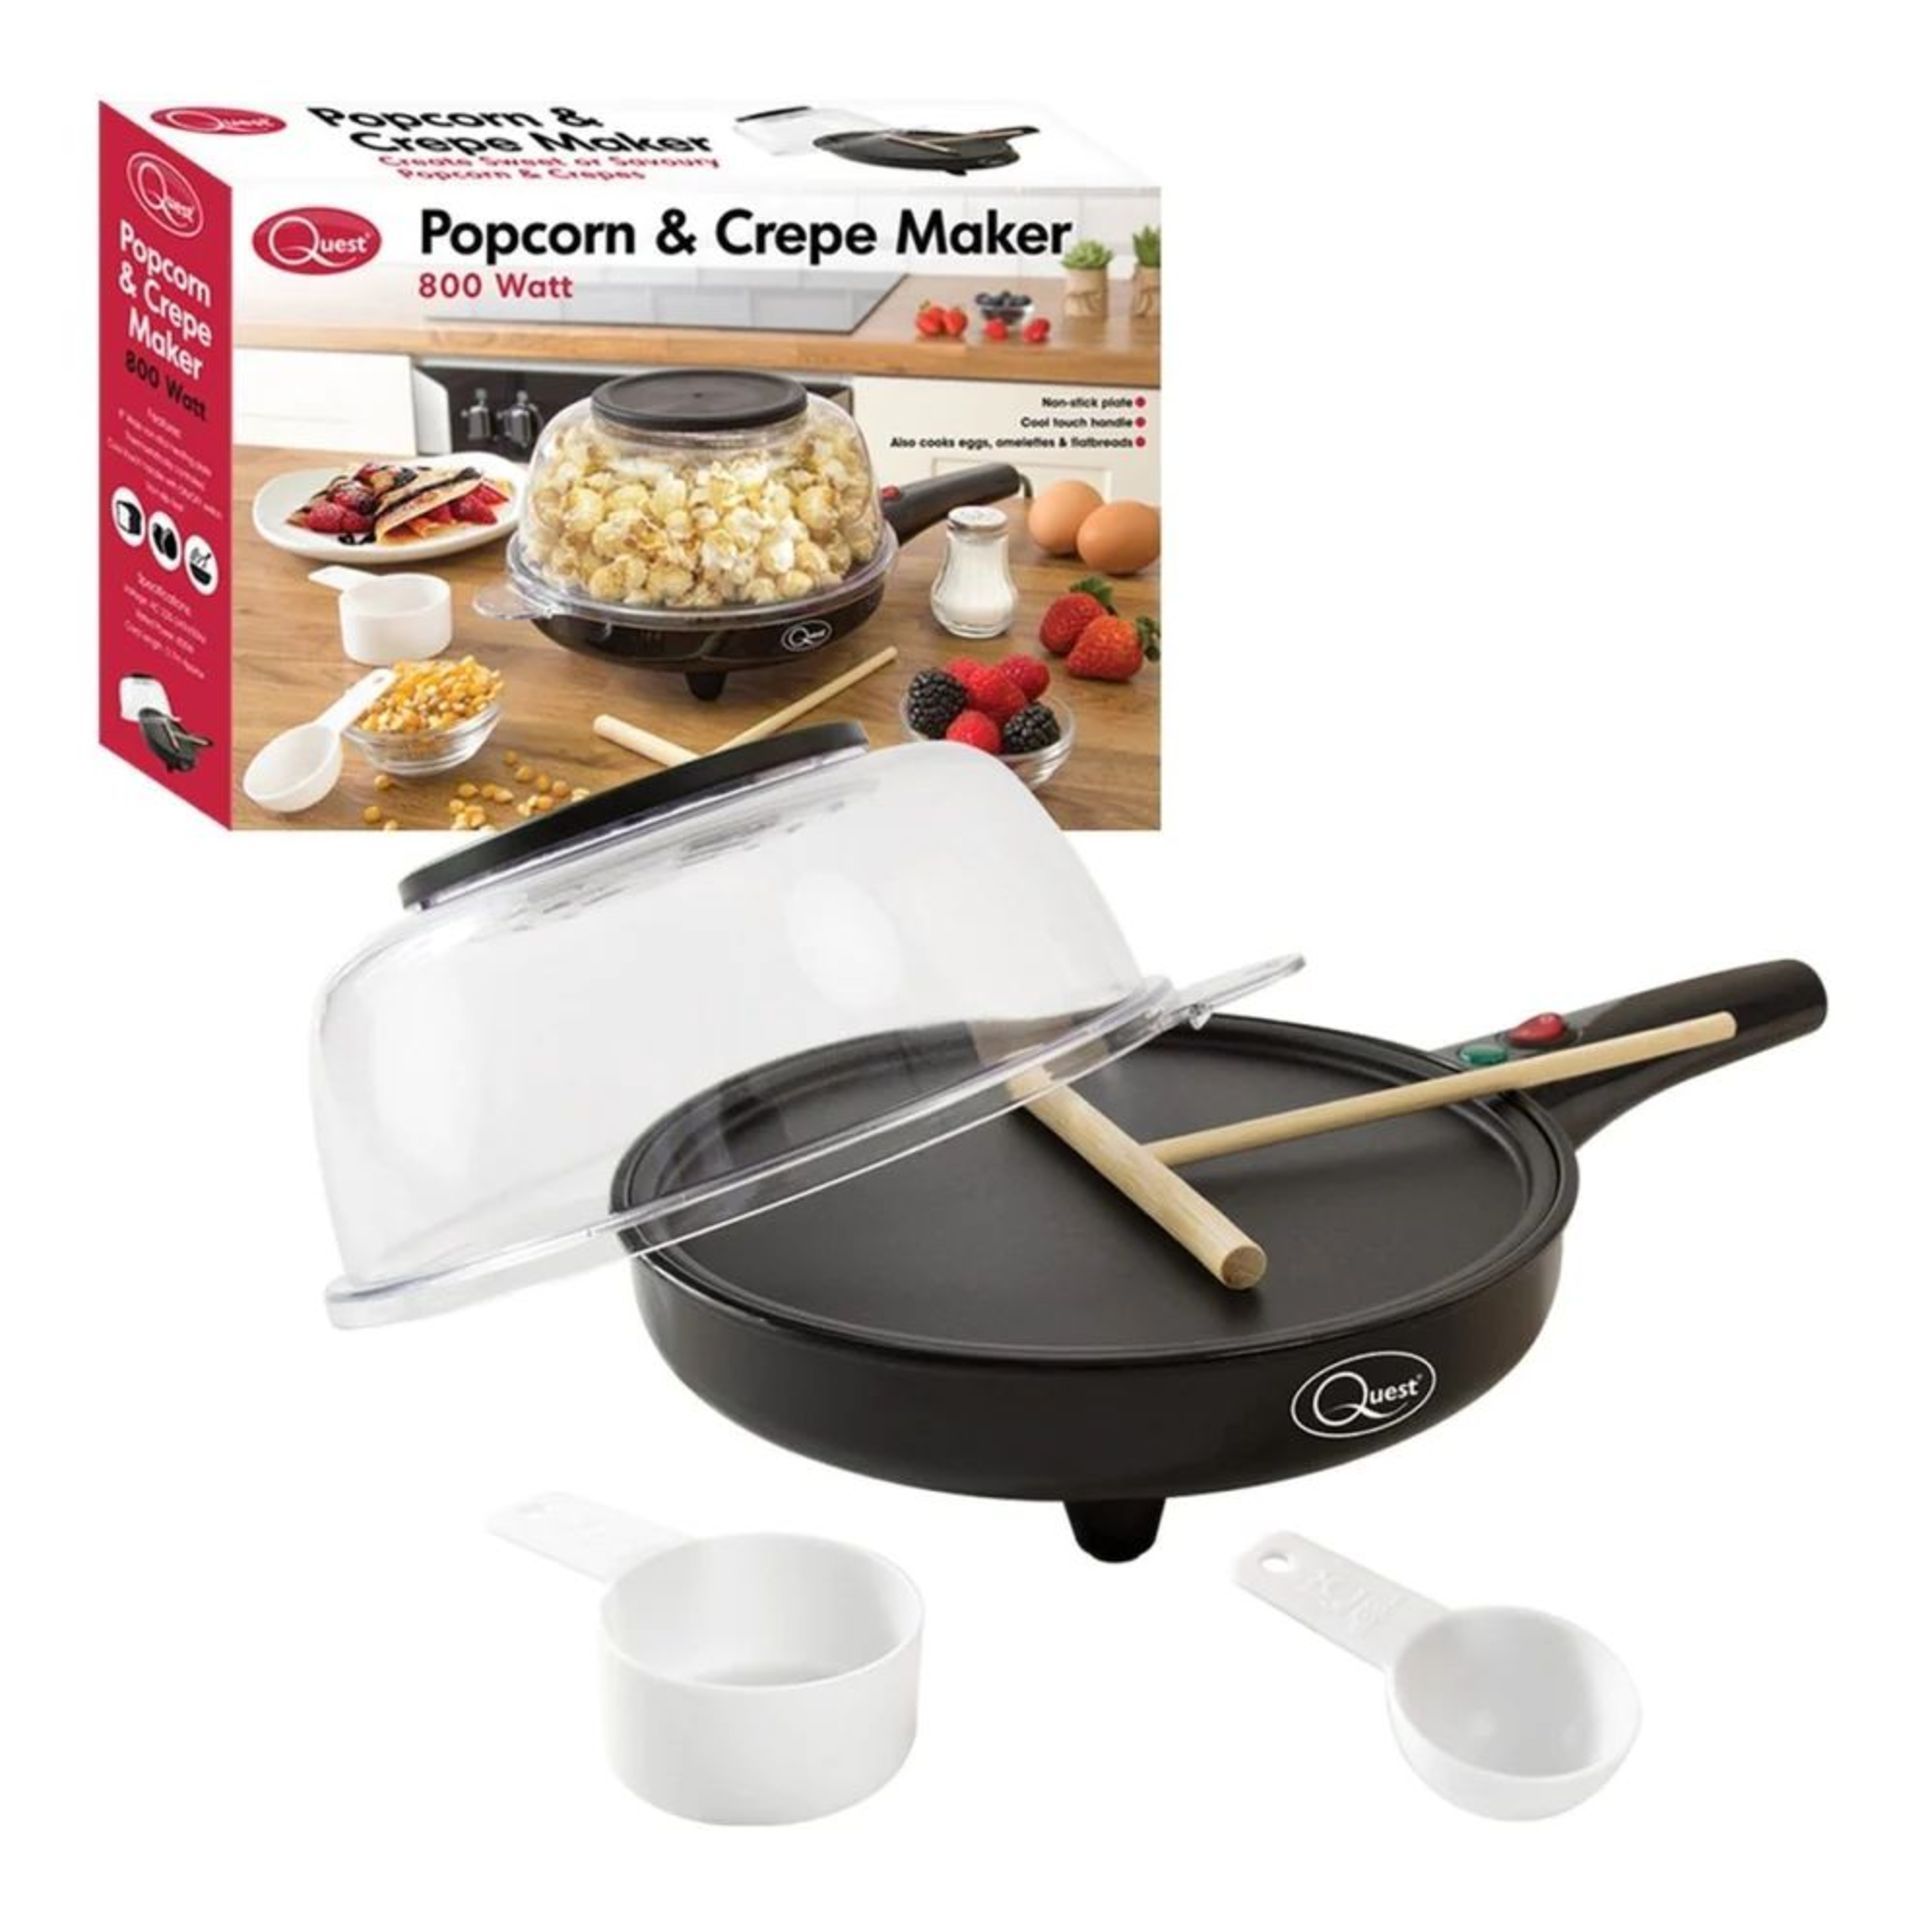 4 X BRAND NEW POPCORN AND CREPE MAKERS R16-11